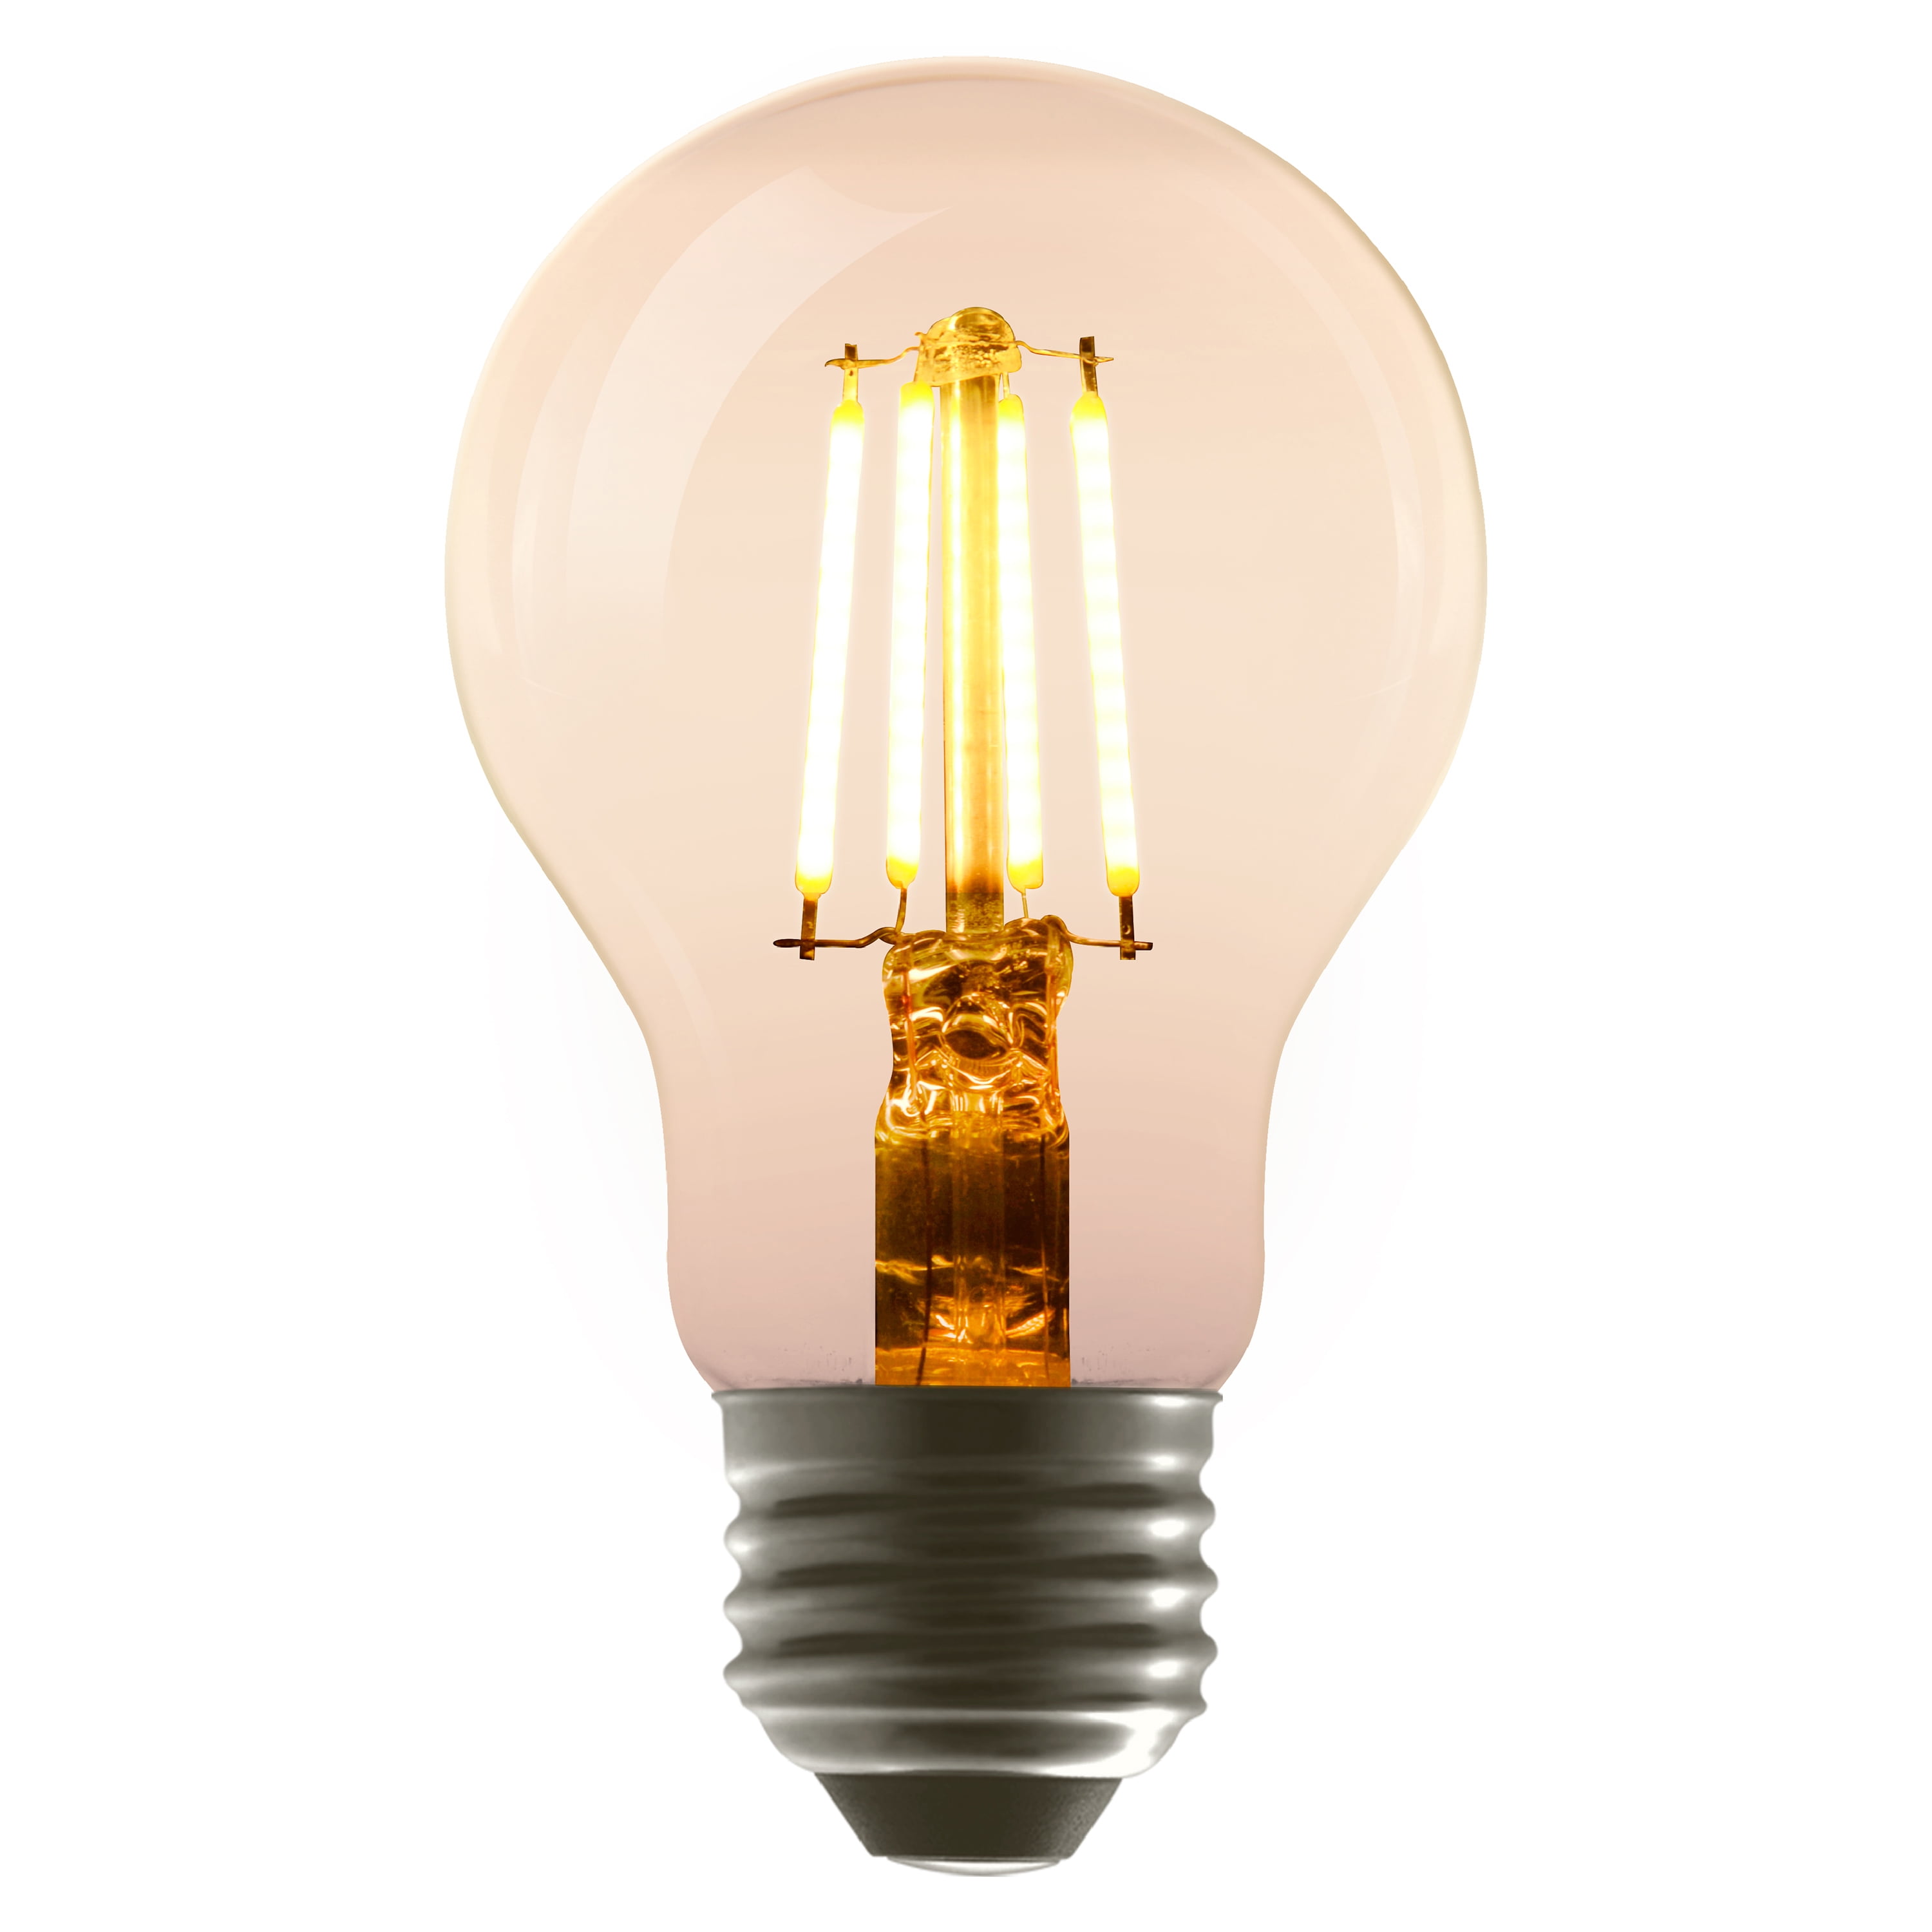 Better Homes & Gardens A19 Vintage LED Amber Light Bulb, 40 Watts Equivalent, 4 Watts Efficient, Dimmable, 2175K, Amber Finish - 2 Pk